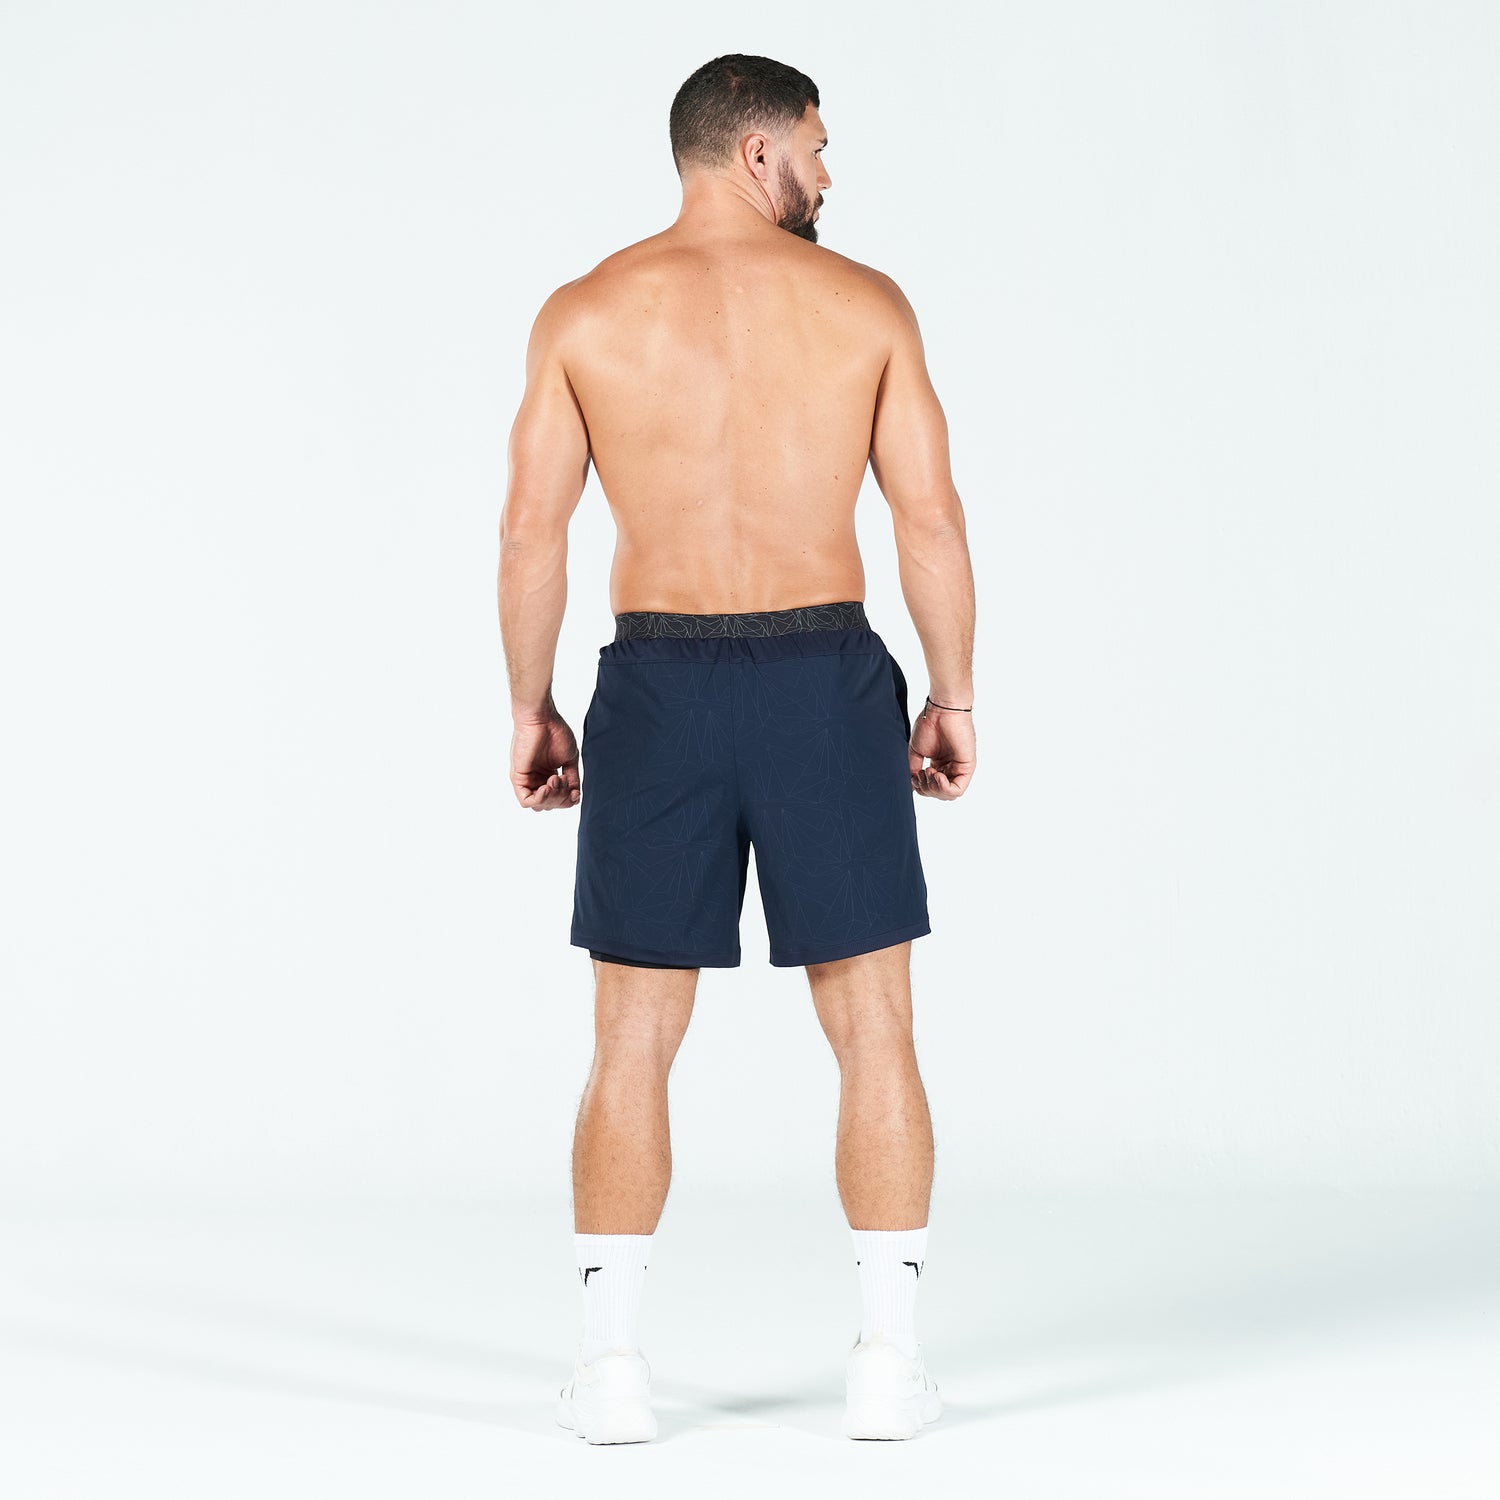 squatwolf-gym-wear-core-7-protech-2-in-1-shorts-navy-workout-short-for-men